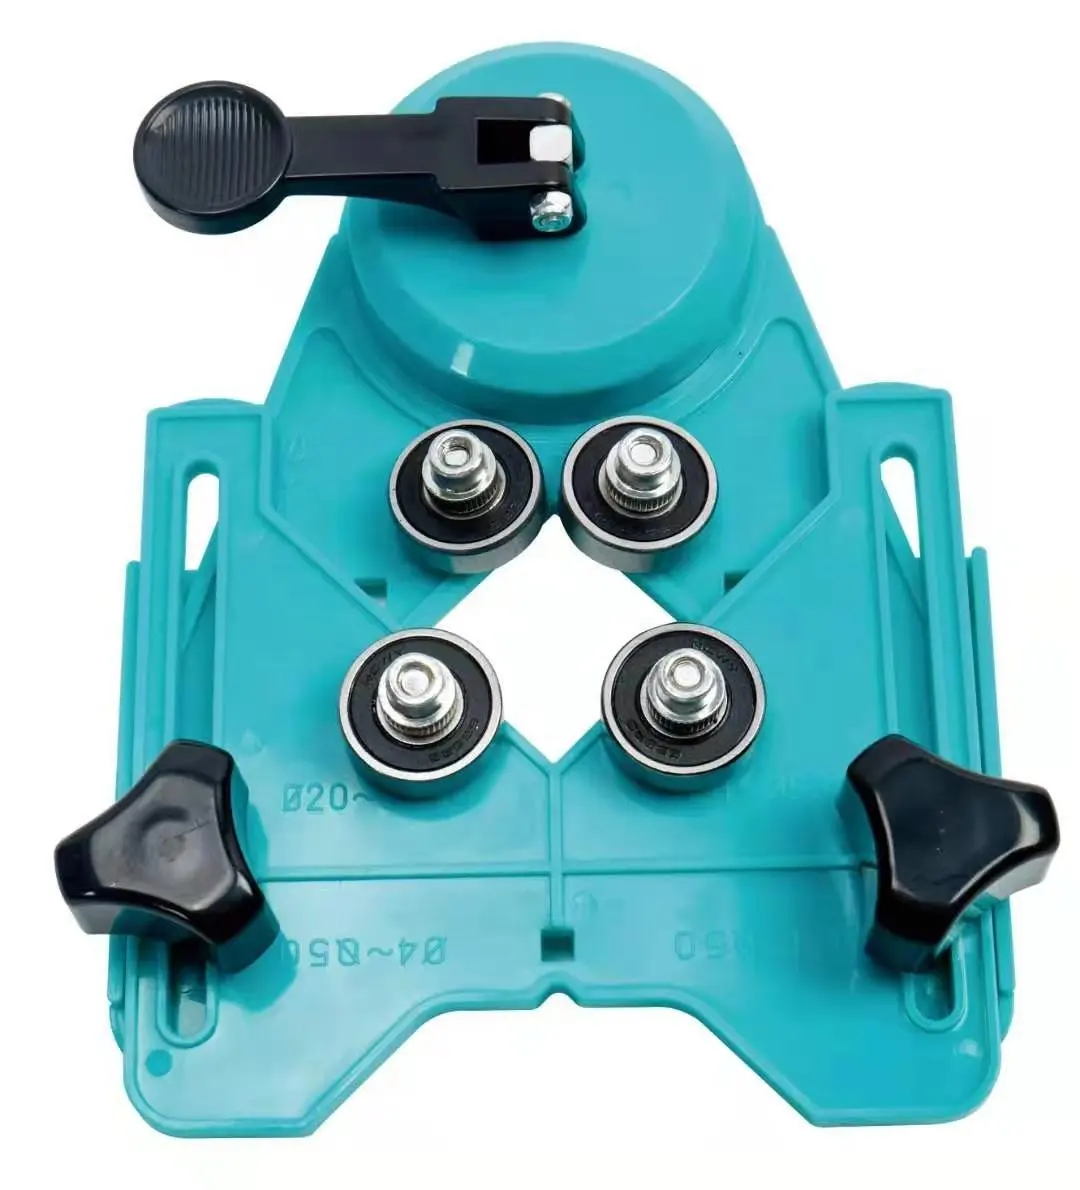 Sucker tile hole positioner multifunctional glass drilling auxiliary tool fixed adjustable hole positioner